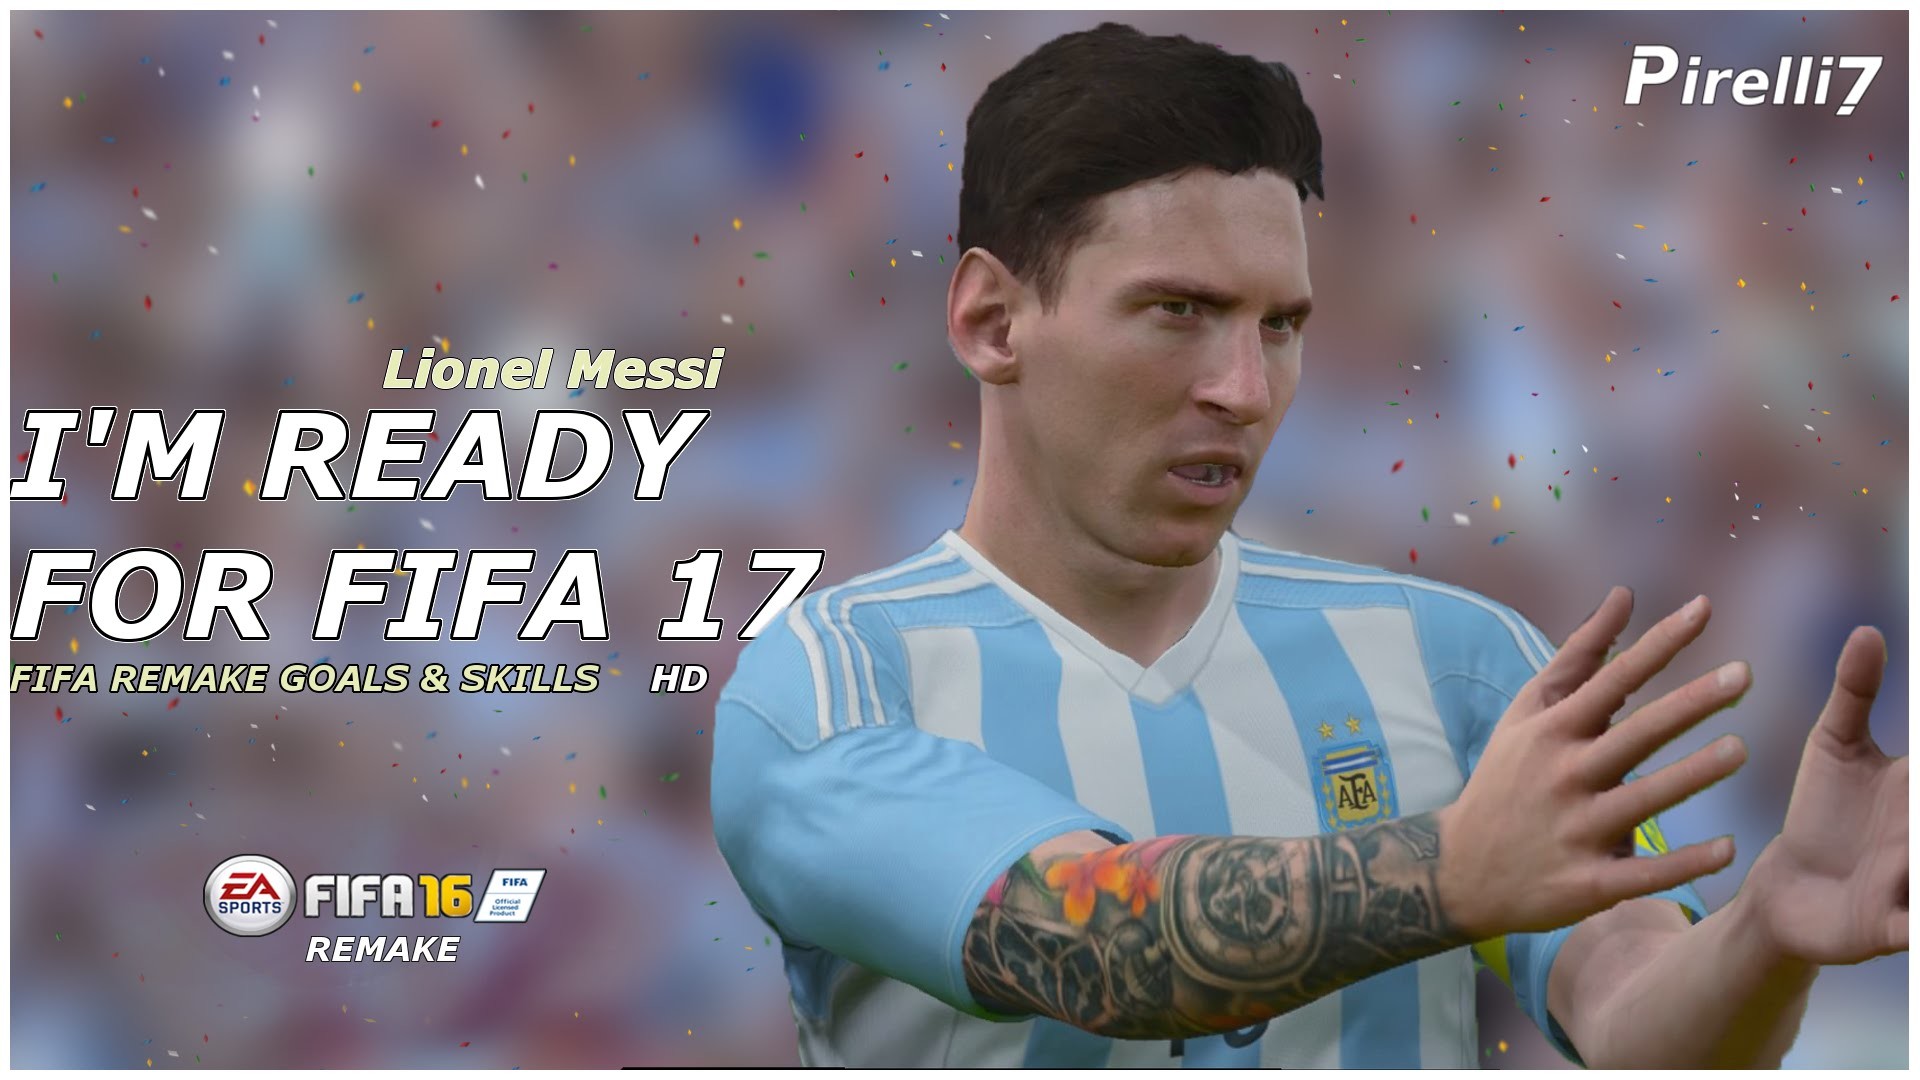 1920x1080 Lionel Messi || I'm Ready for FIFA 17 || Goals & Skills - FIFA Remake ||  1080p by Pirelli7 - YouTube